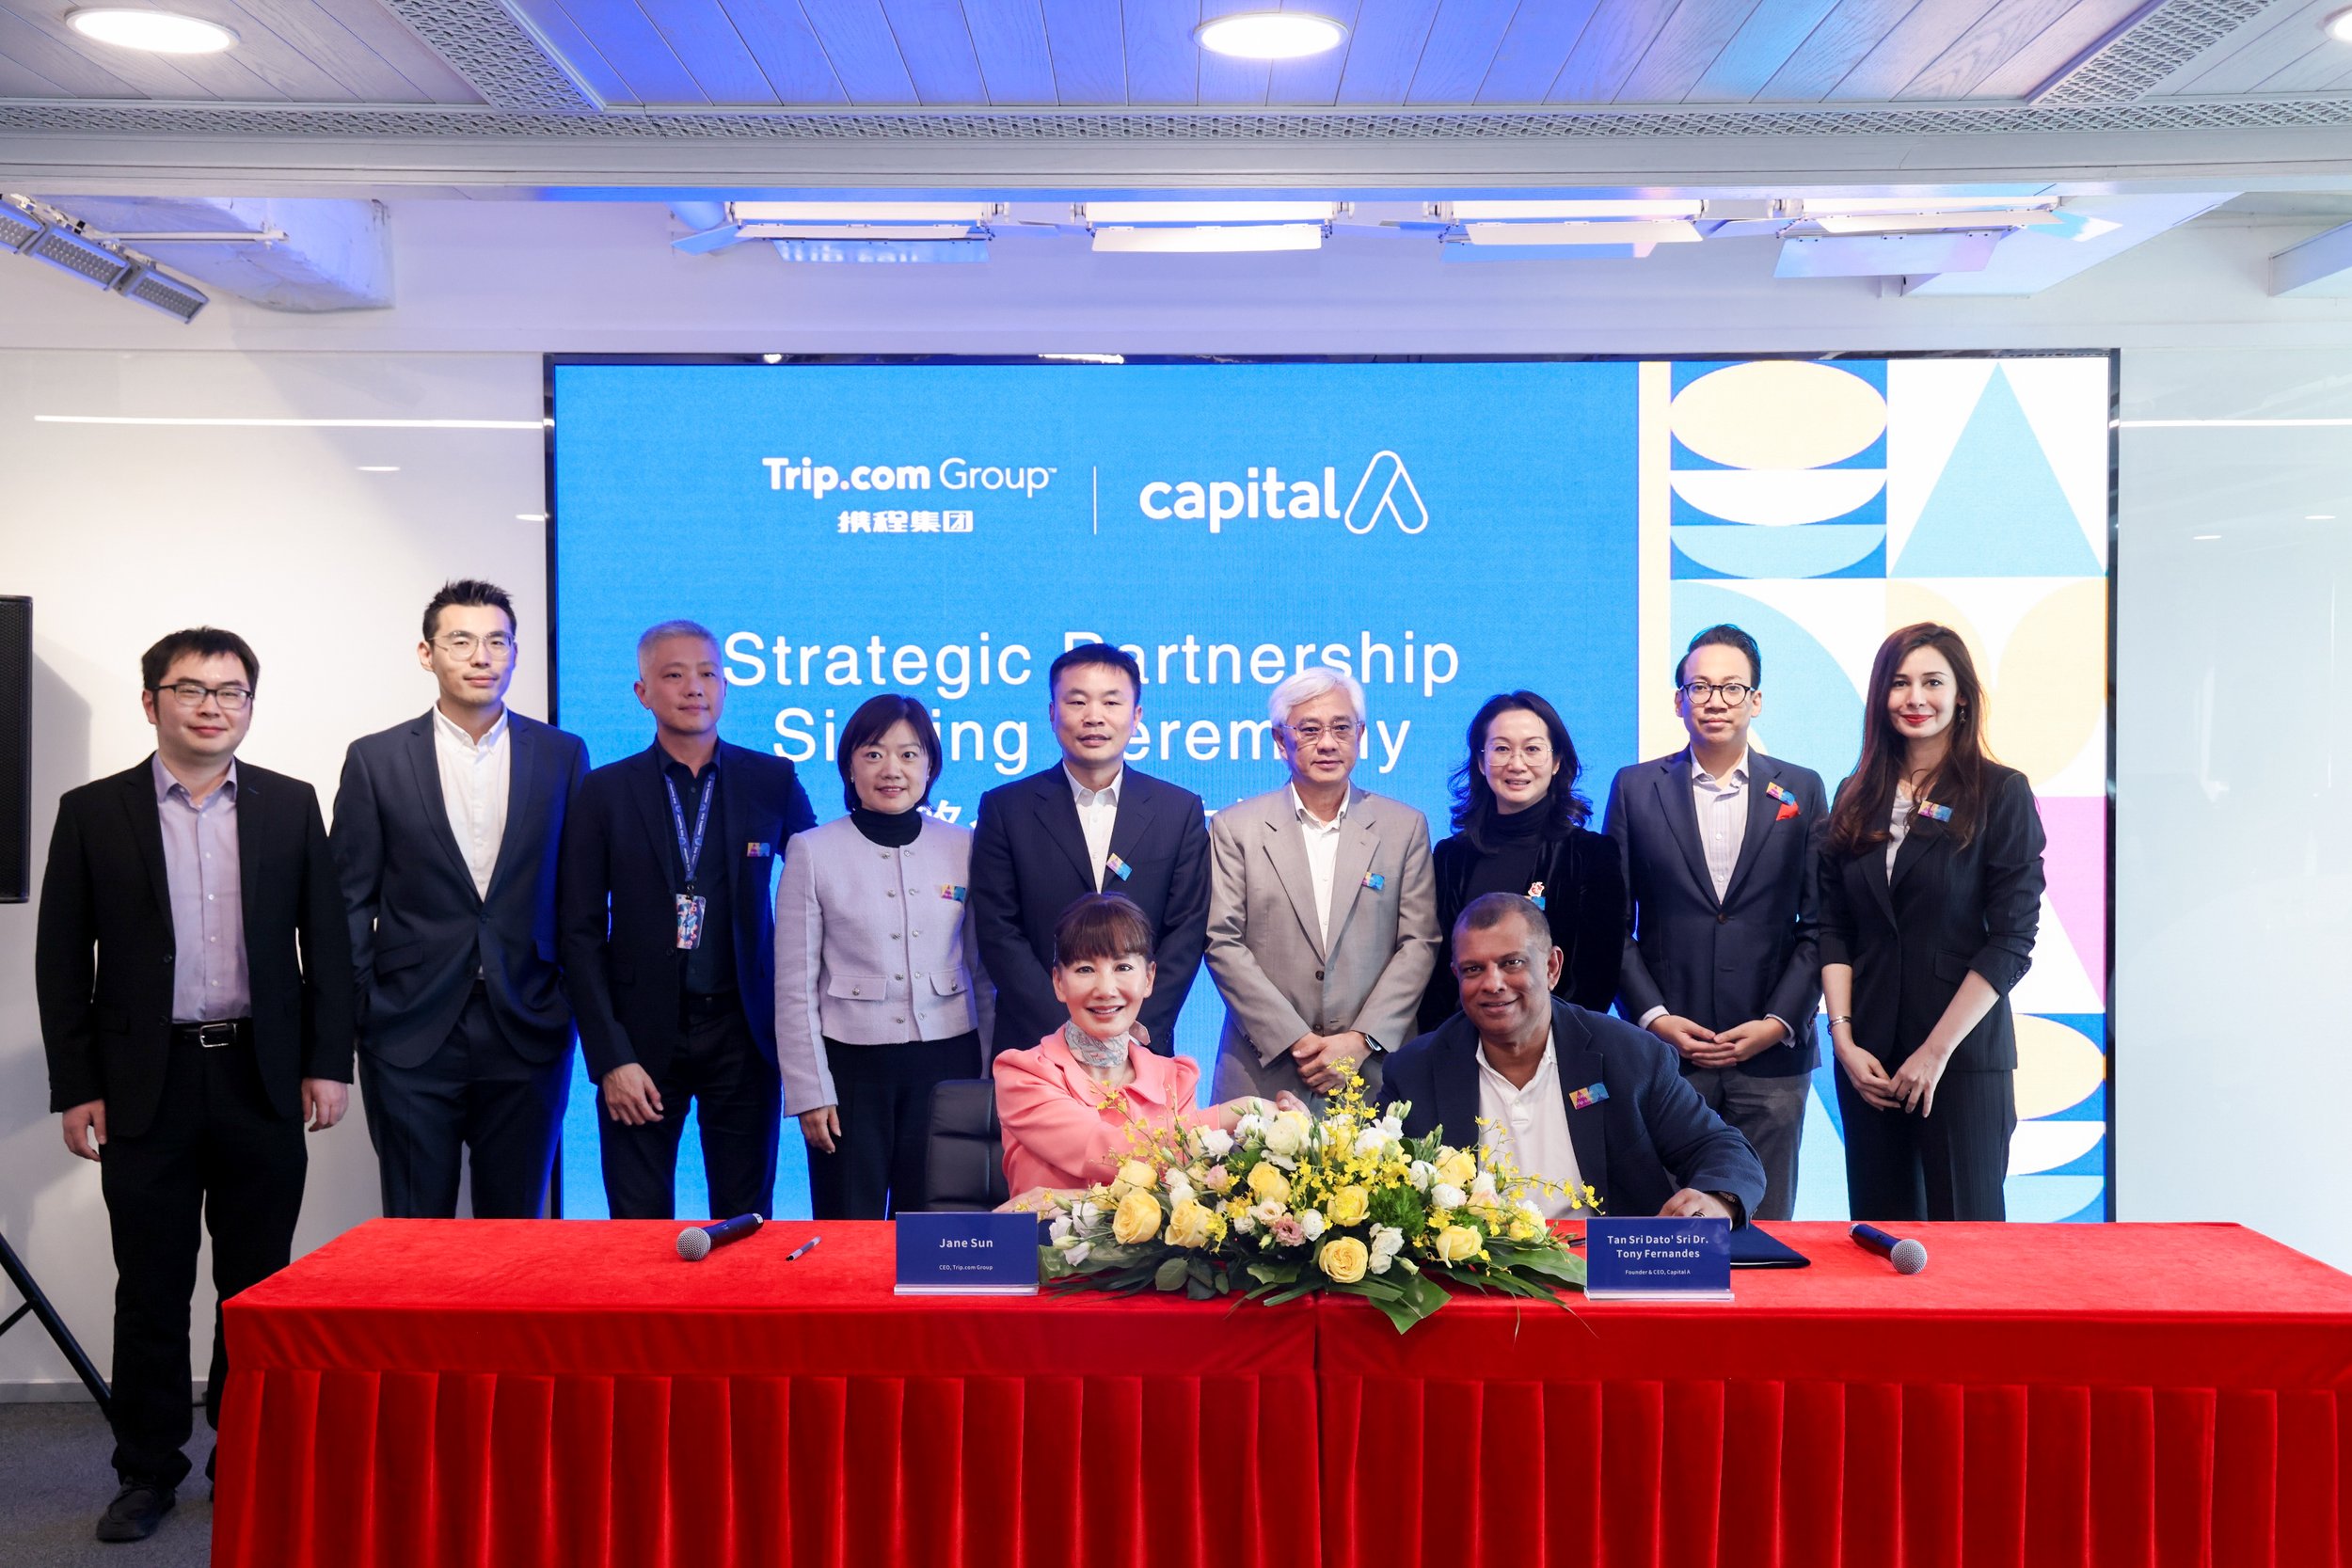  Photo Caption: Tony Fernandes (seated, right) with Jane Sun, CEO of Trip.com Group during the partnership signing ceremony in Shanghai. Also present are the senior managements of both entities, including Chairman of AirAsia Aviation Group Limited (A